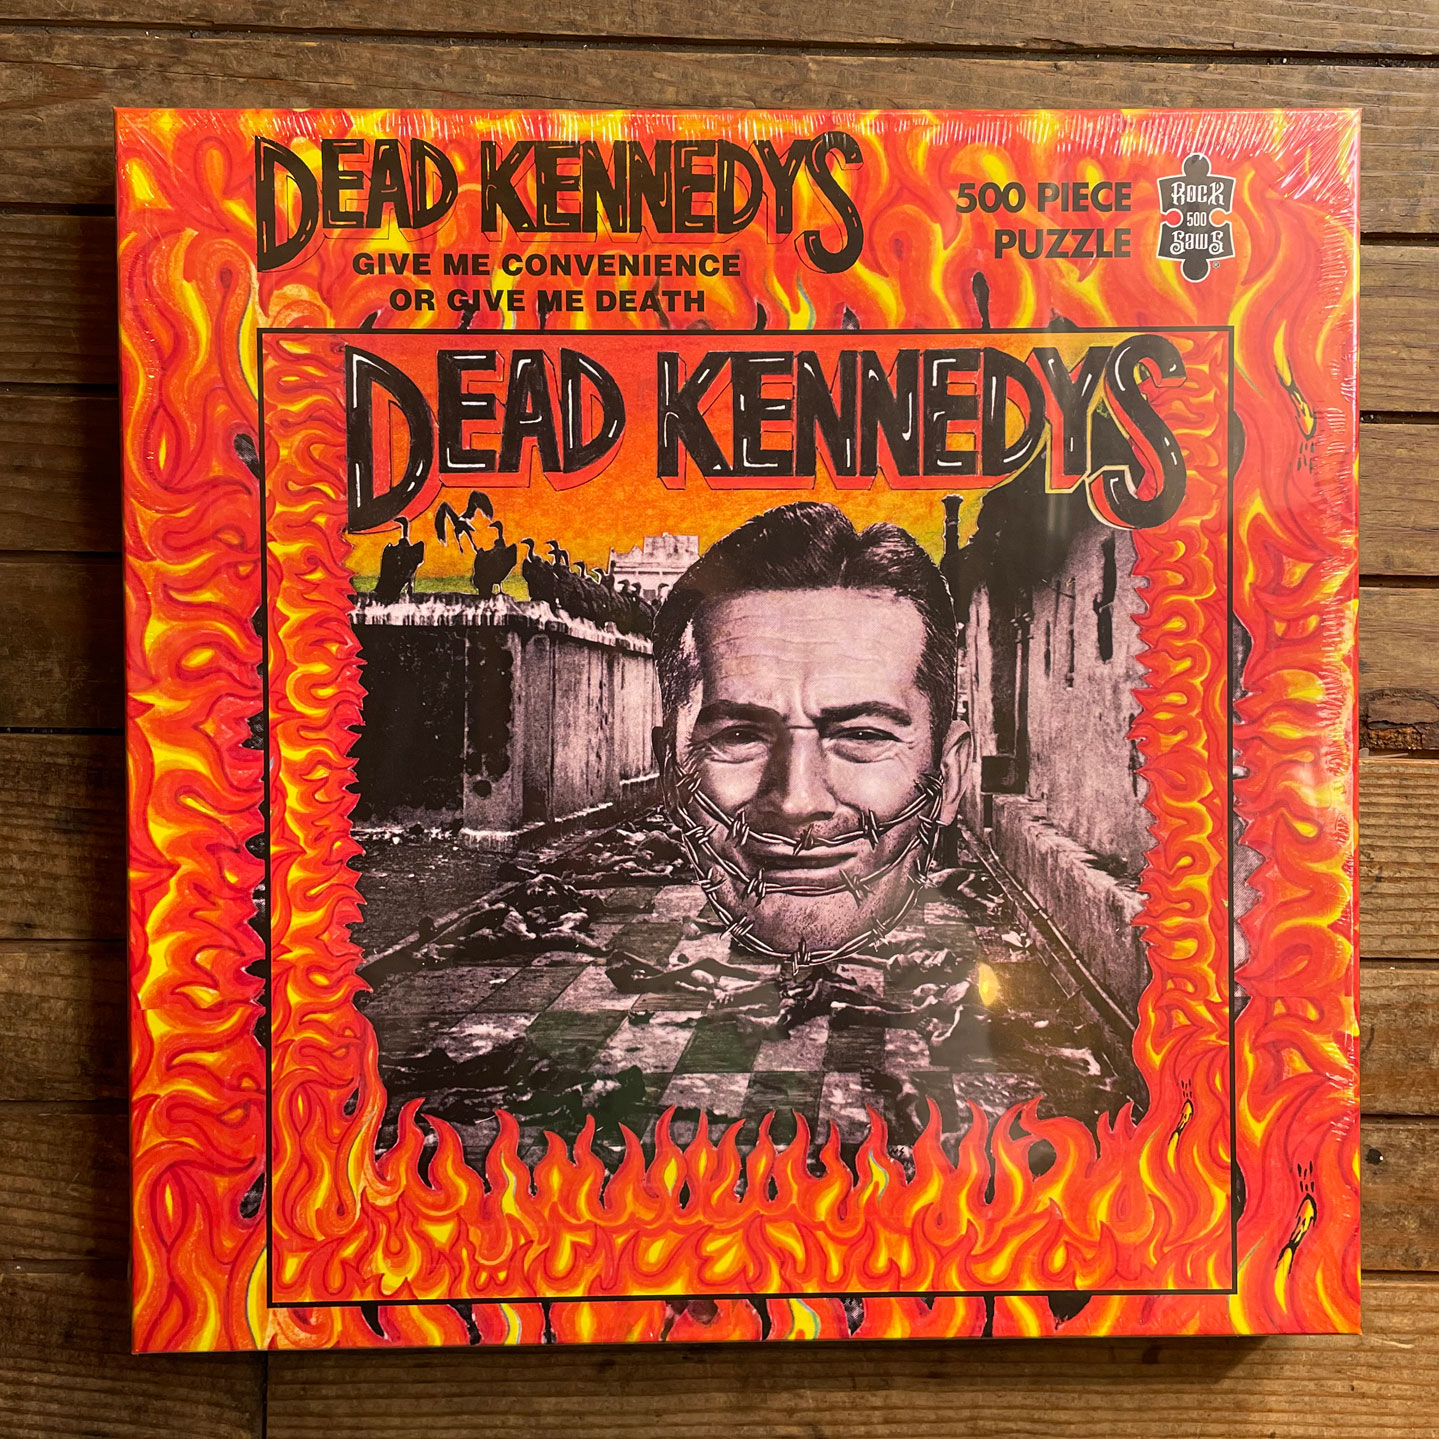 DEAD KENNEDYS RAMONES 500ピース パズル GIVE ME CONVENIENCE OR GIVE ME DEATH